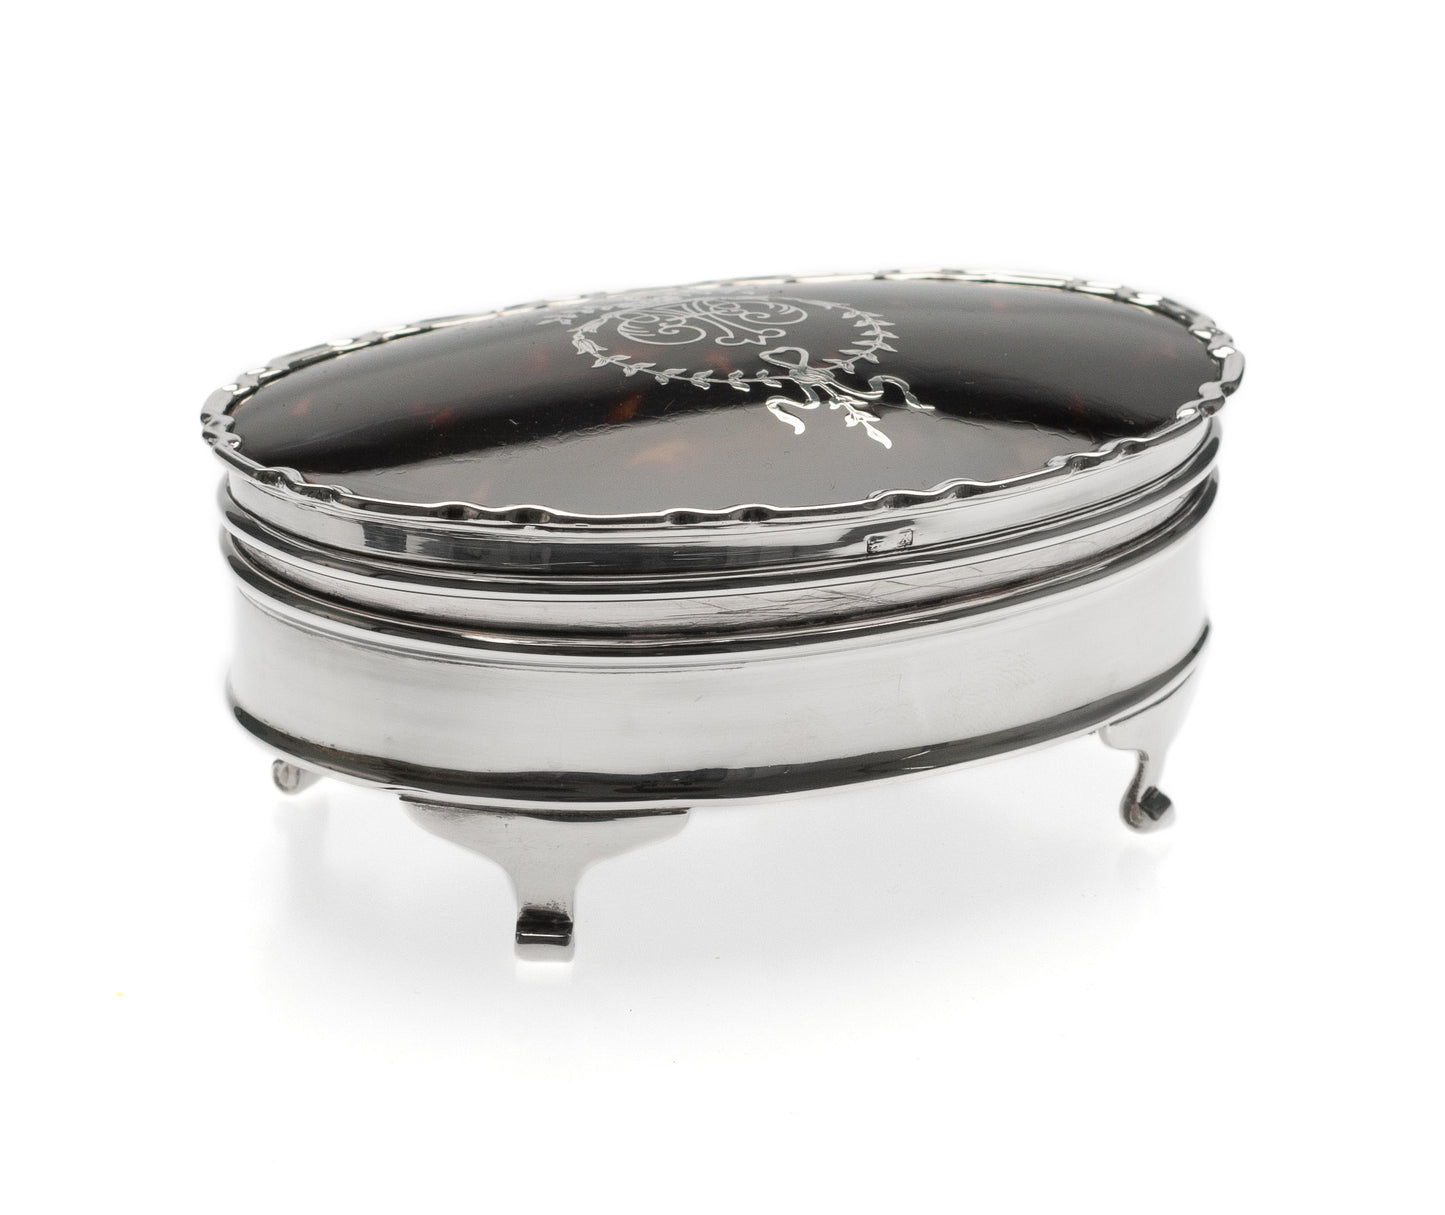 Antique Sterling Silver Ring / Jewel Box with Inlaid Lid & Fabric Lined Interior (Code 2302)